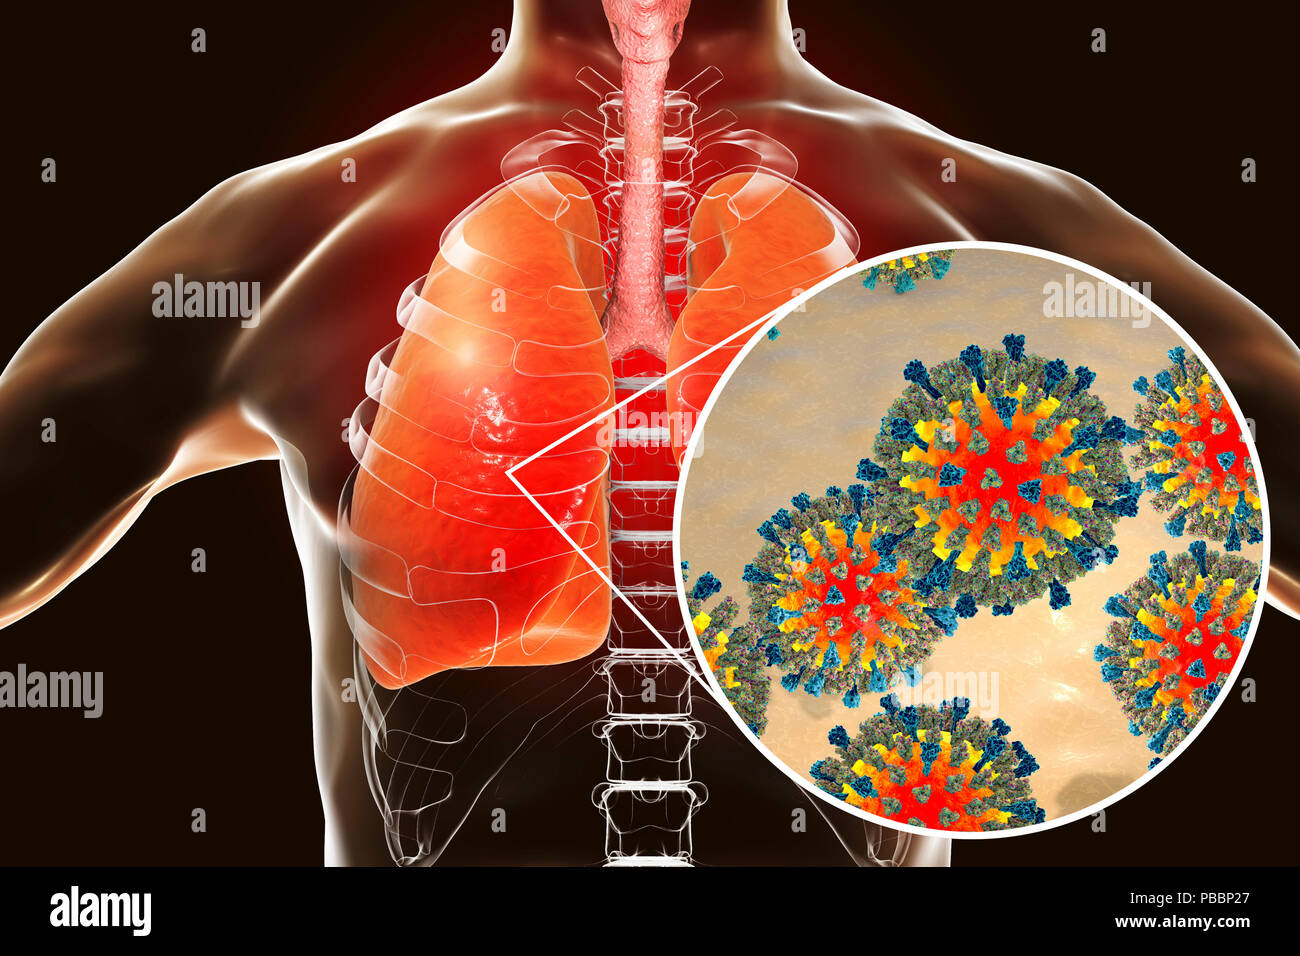 Pneumonia caused by measles viruses, conceptual computer illustration. Measles virus, from the Morbillivirus group of viruses, consists of an RNA (ribonucleic acid) core surrounded by an envelope studded with surface proteins haemagglutinin-neuraminidase and fusion protein, which are used to attach to and penetrate a host cell. Measles is a highly infectious itchy rash with a fever. It mainly affects children, but one attack usually gives life-long immunity. Pneumonia is one of common complications of measles. Stock Photo